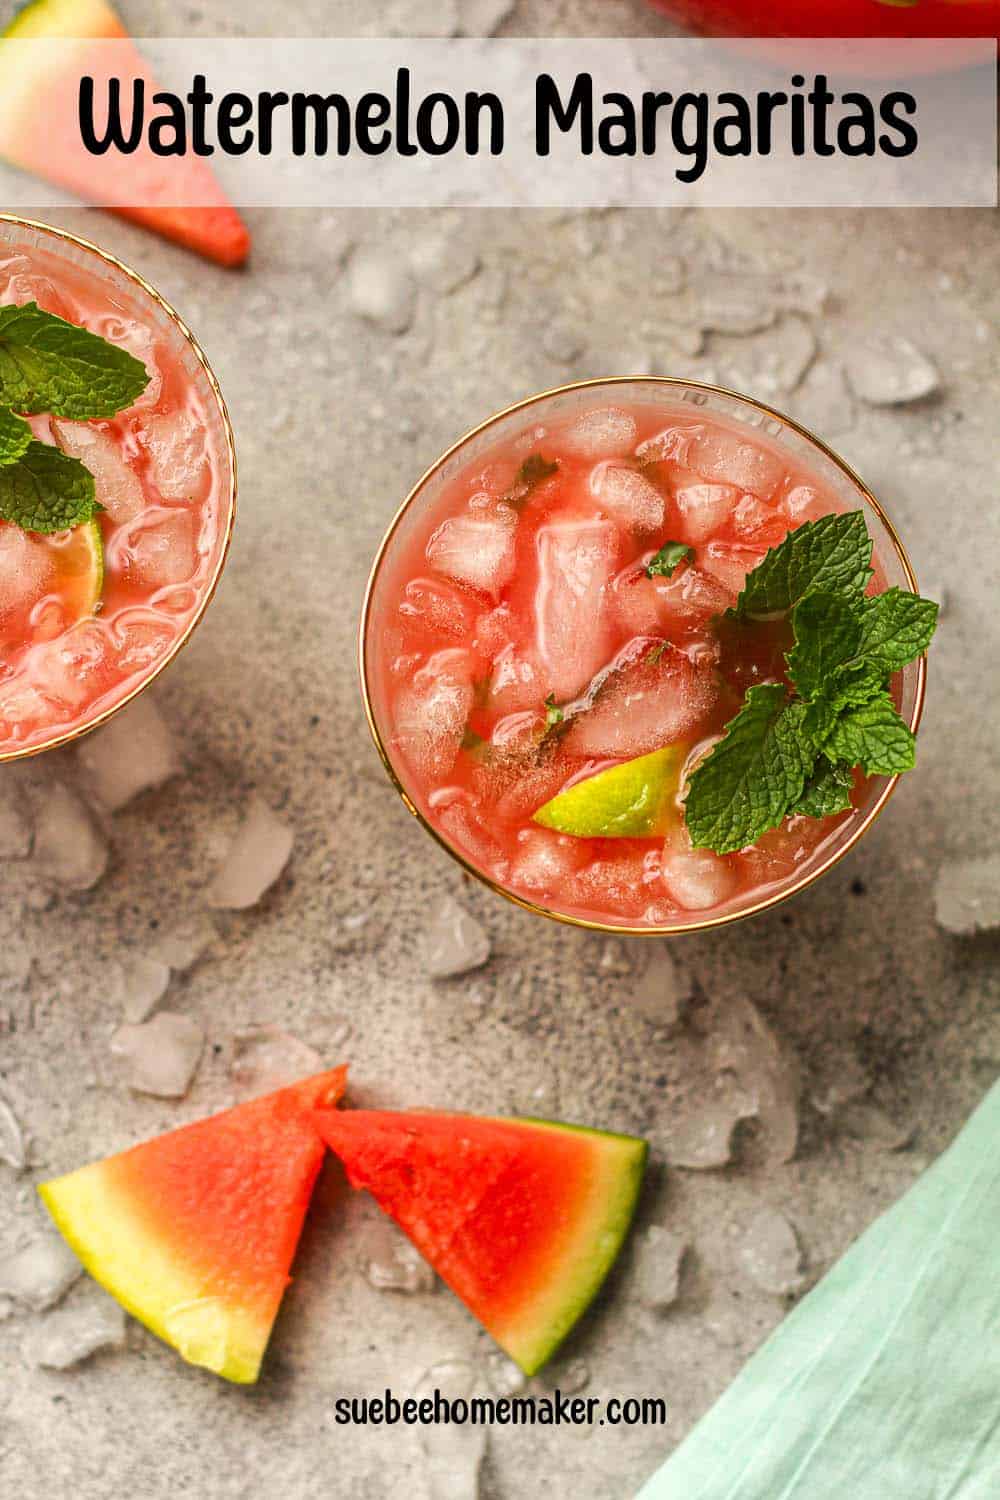 Two watermelon margaritas with mint leaves.